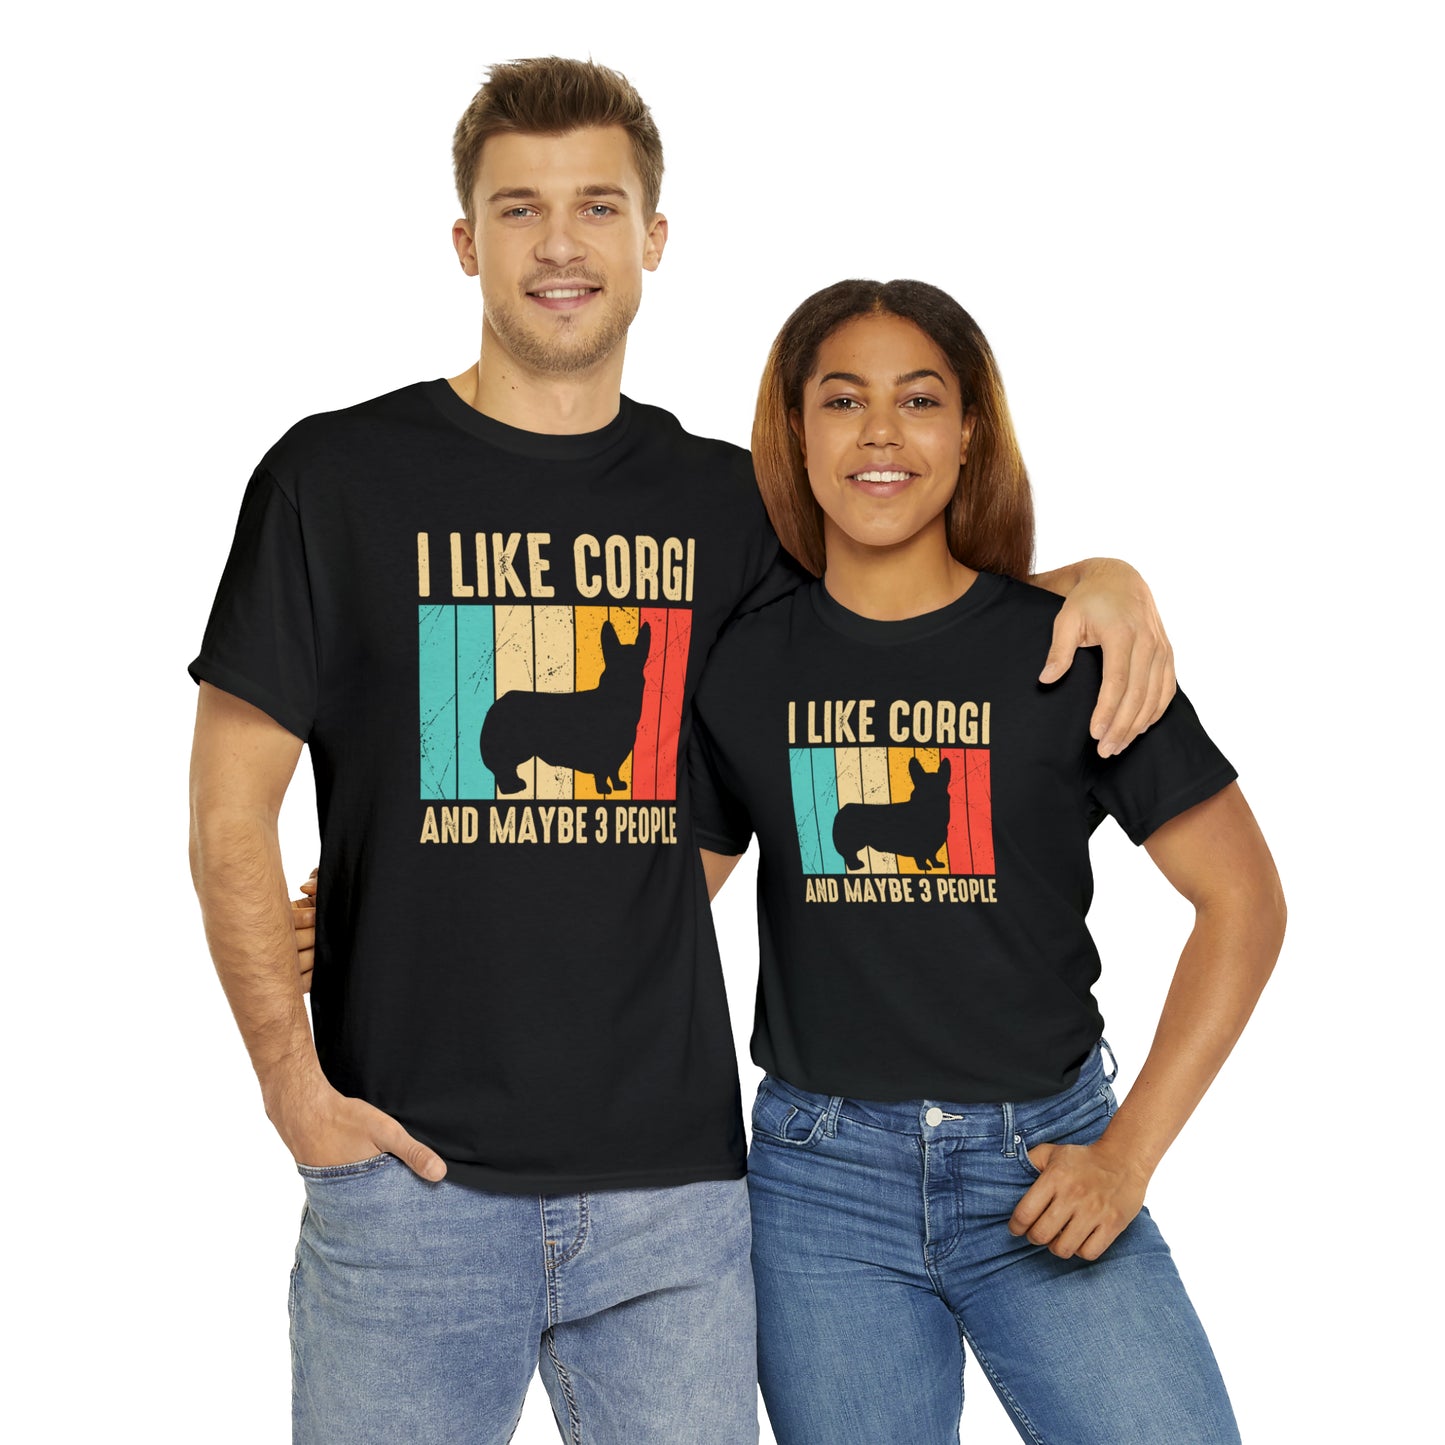 "I Like Corgi & Maybe 3 People" T-Shirt - Weave Got Gifts - Unique Gifts You Won’t Find Anywhere Else!